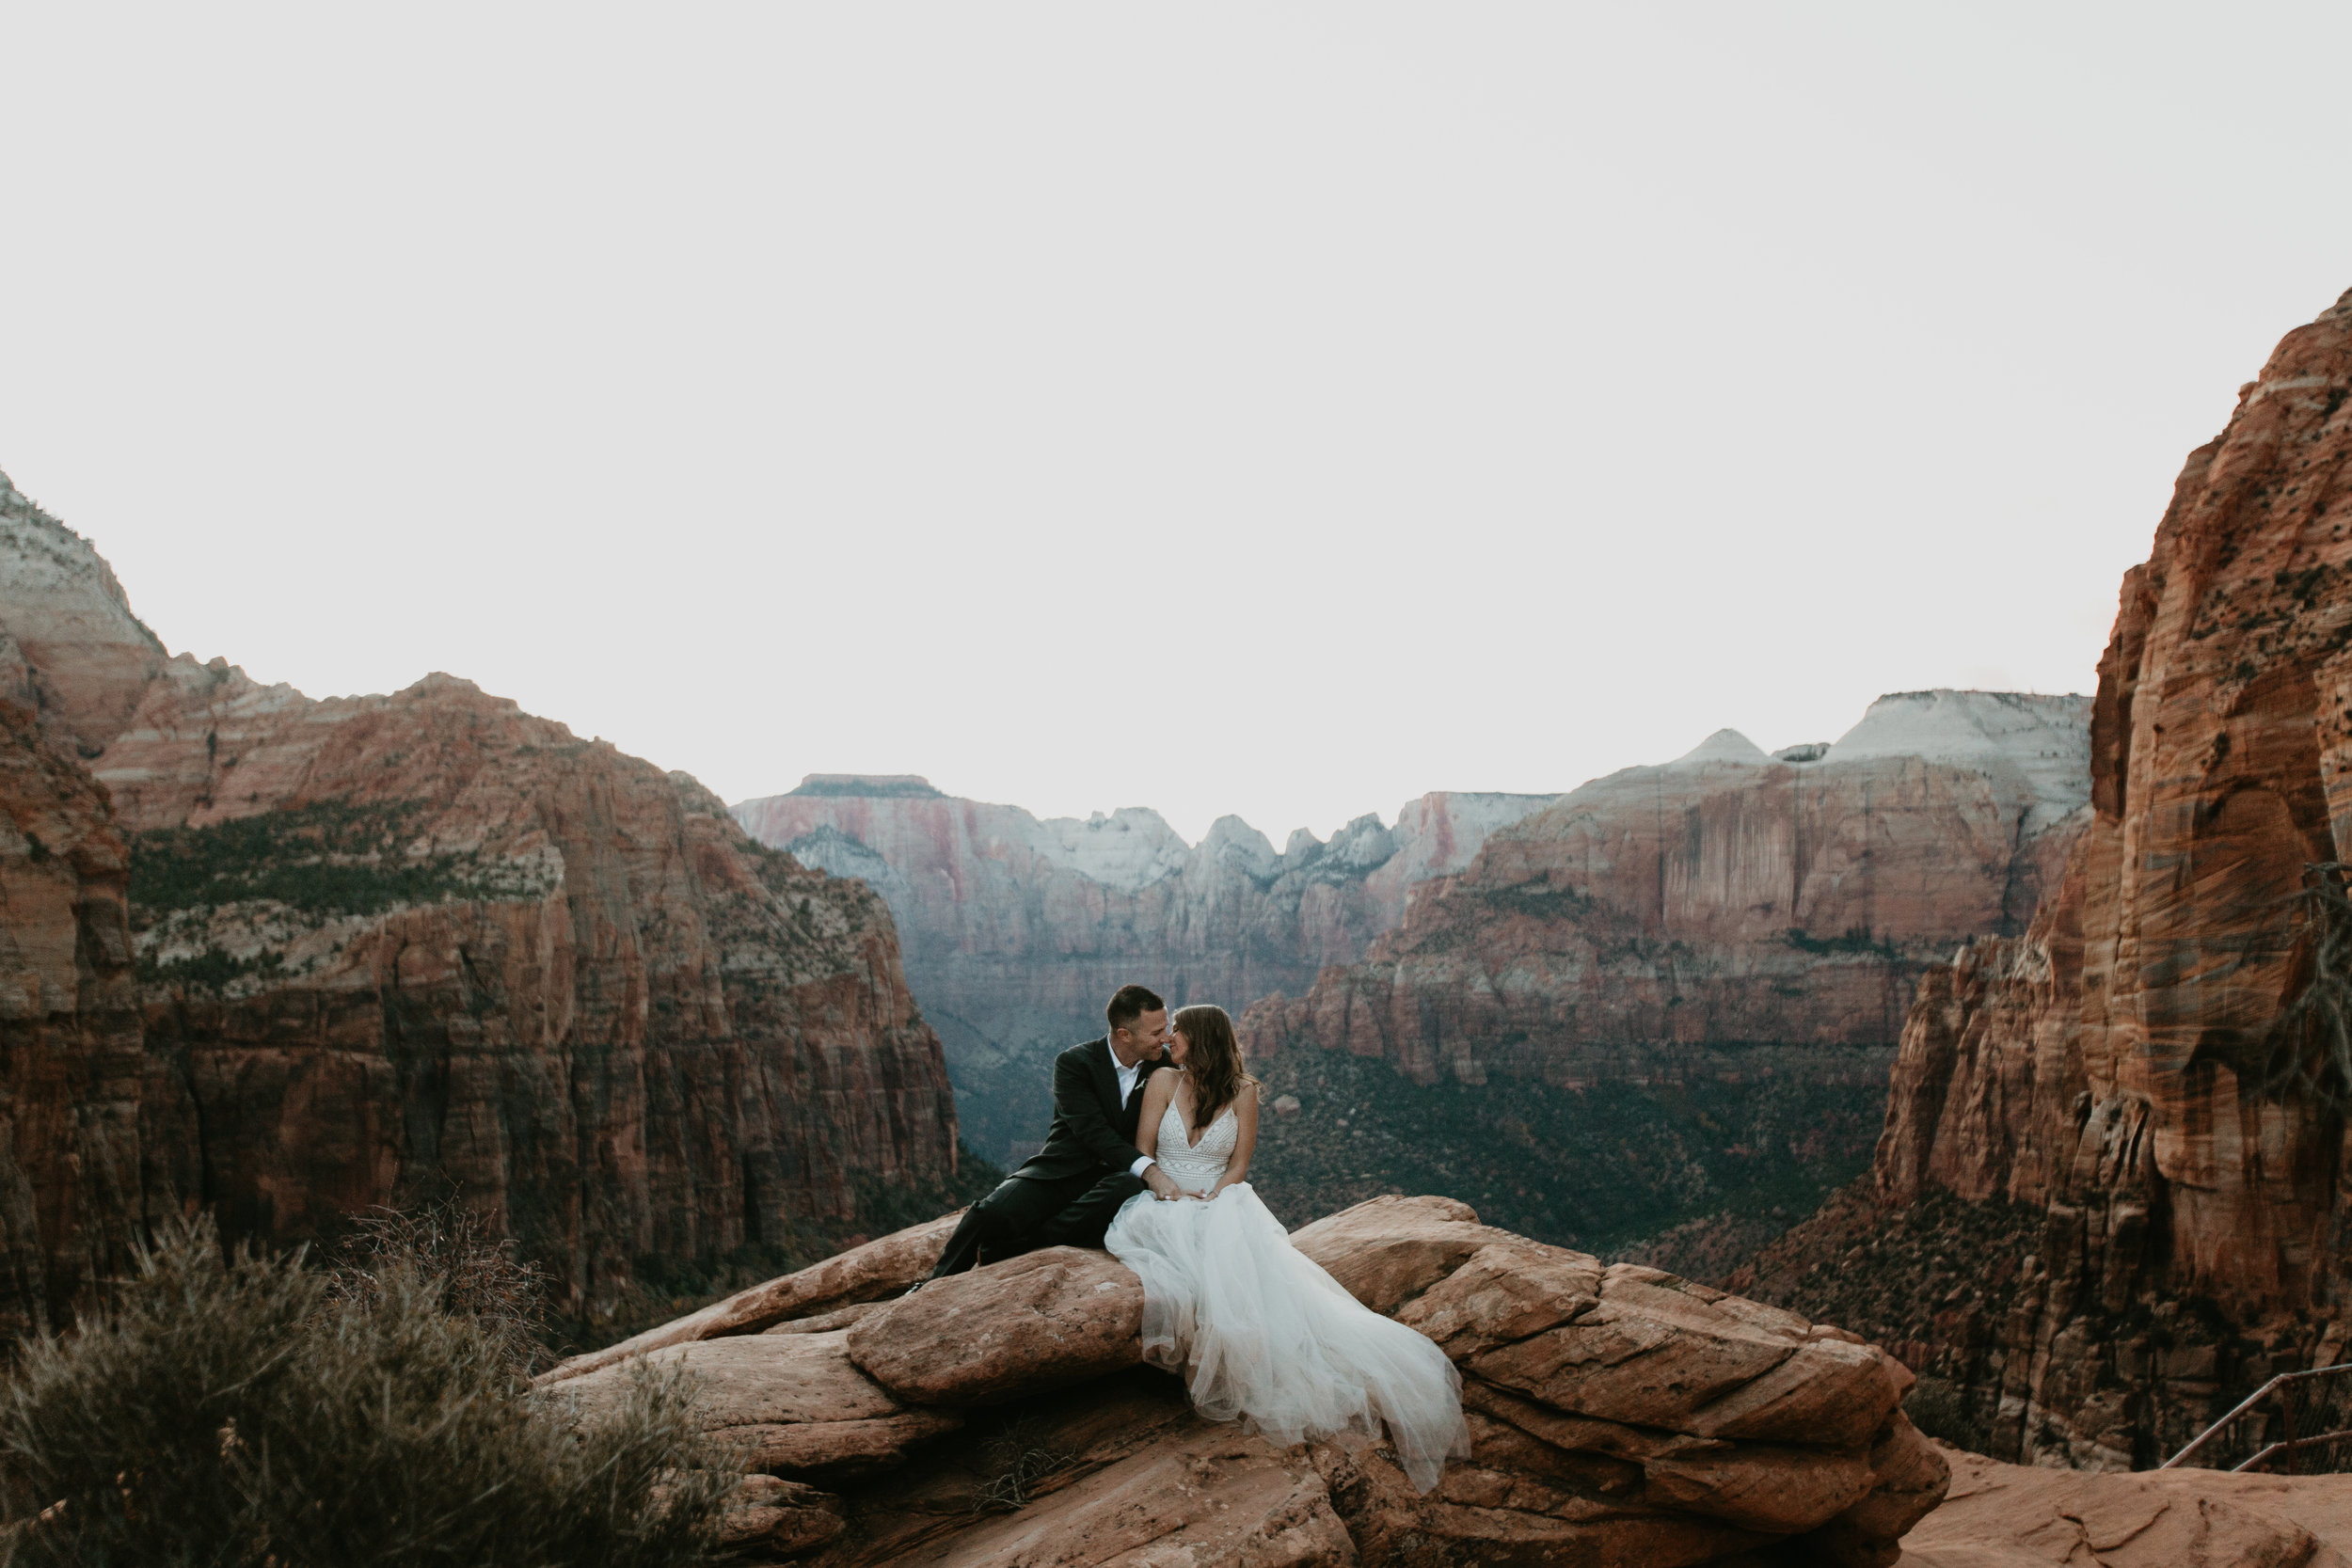 nicole-daacke-photography-zion-national-park-elopement-photographer-canyon-overlook-trail-elope-hiking-adventure-wedding-photos-fall-utah-red-rock-canyon-stgeorge-eloping-photographer-87.jpg